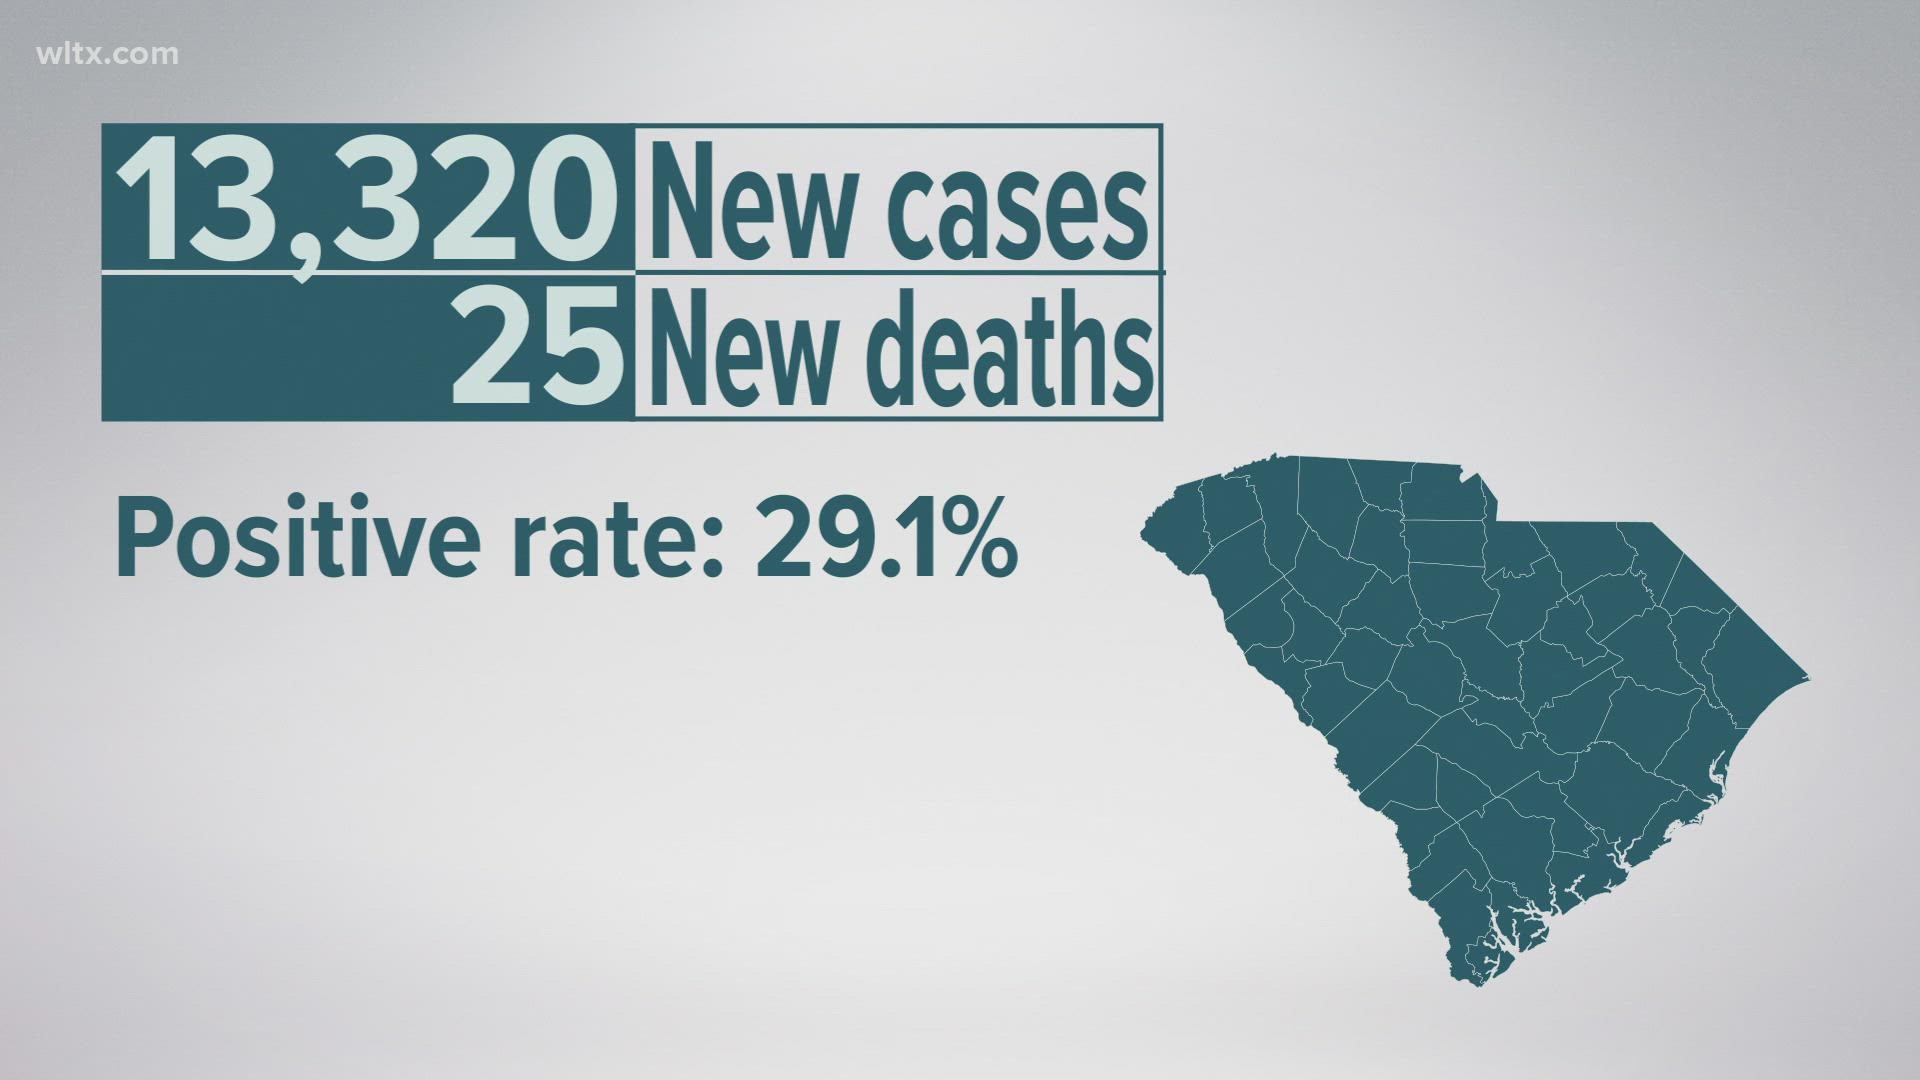 Over 13,300 cases of covid in South Carolina were reported on January 6, 2022.